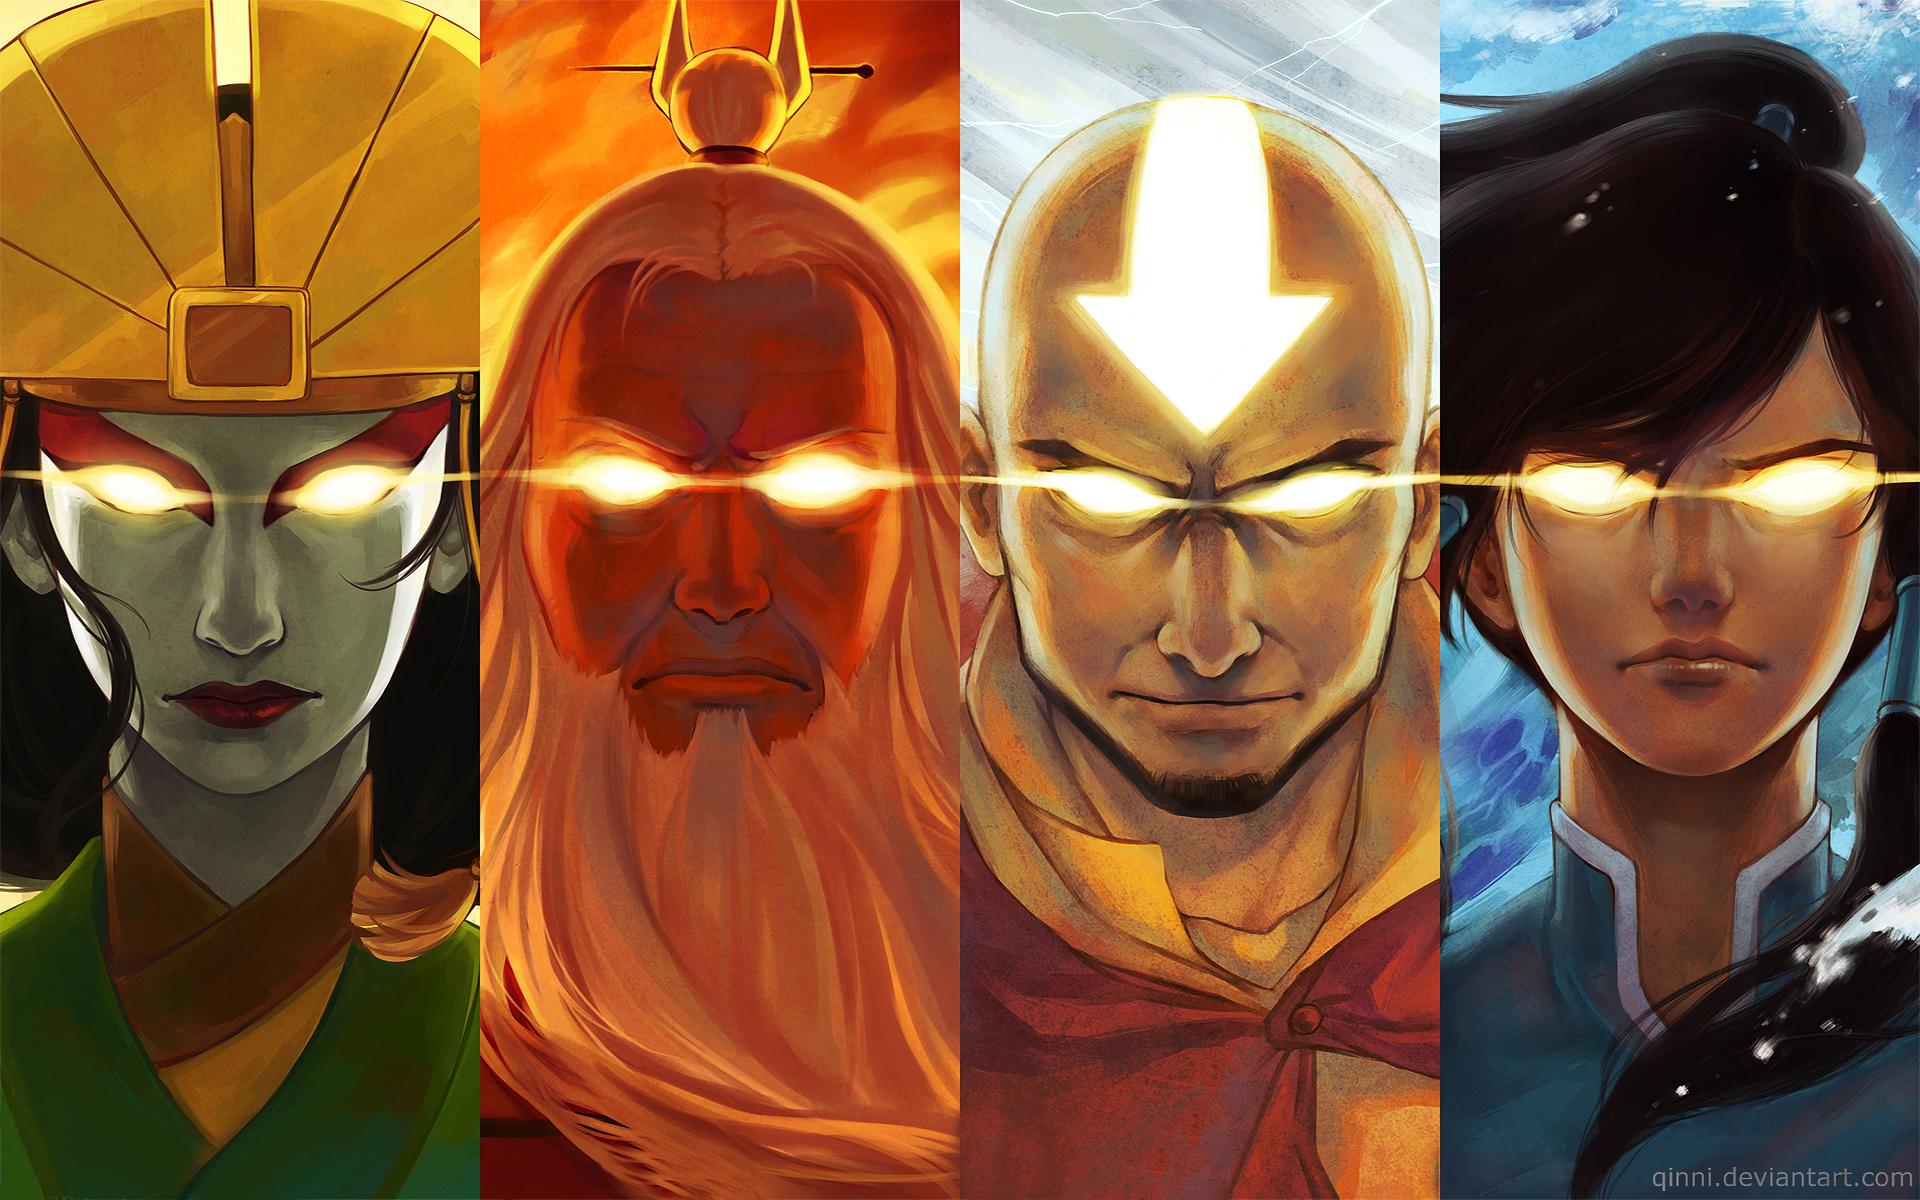 avatar the last airbender free online download